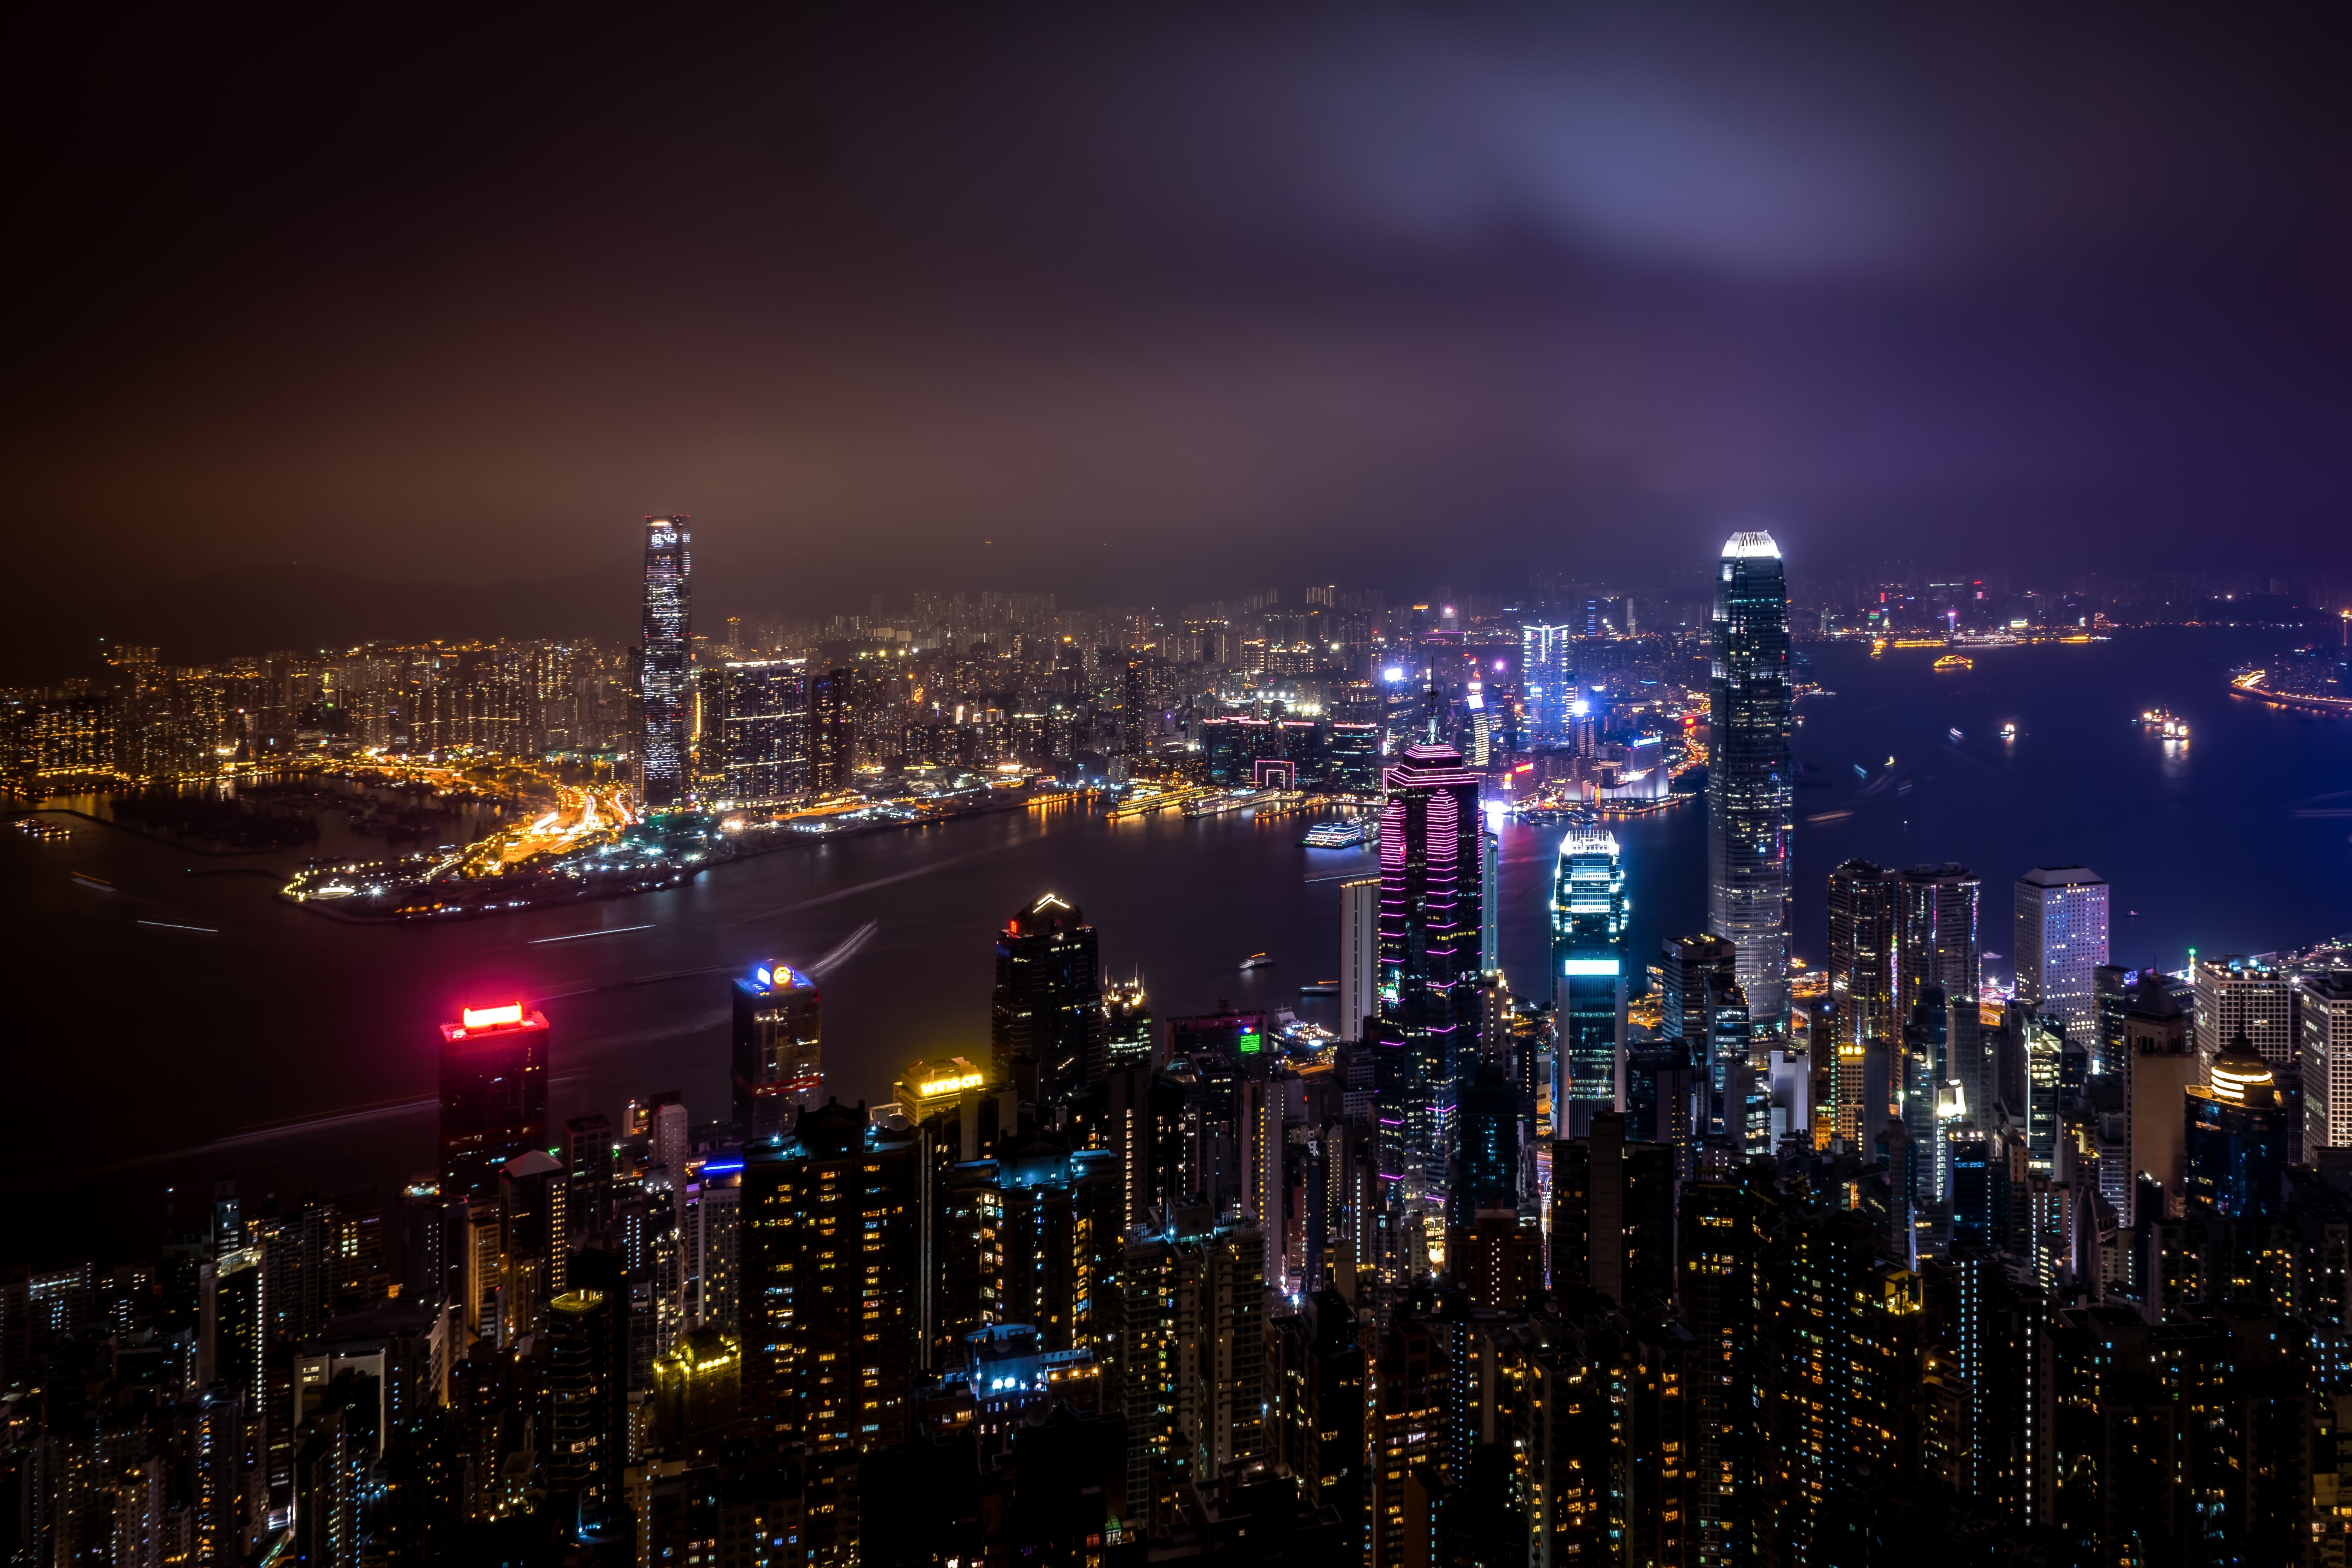 HD wallpaper, River, Cityscape, Aerial View, Skyscrapers, Body Of Water, City Lights, Night Time, Hong Kong City Skyline, 5K